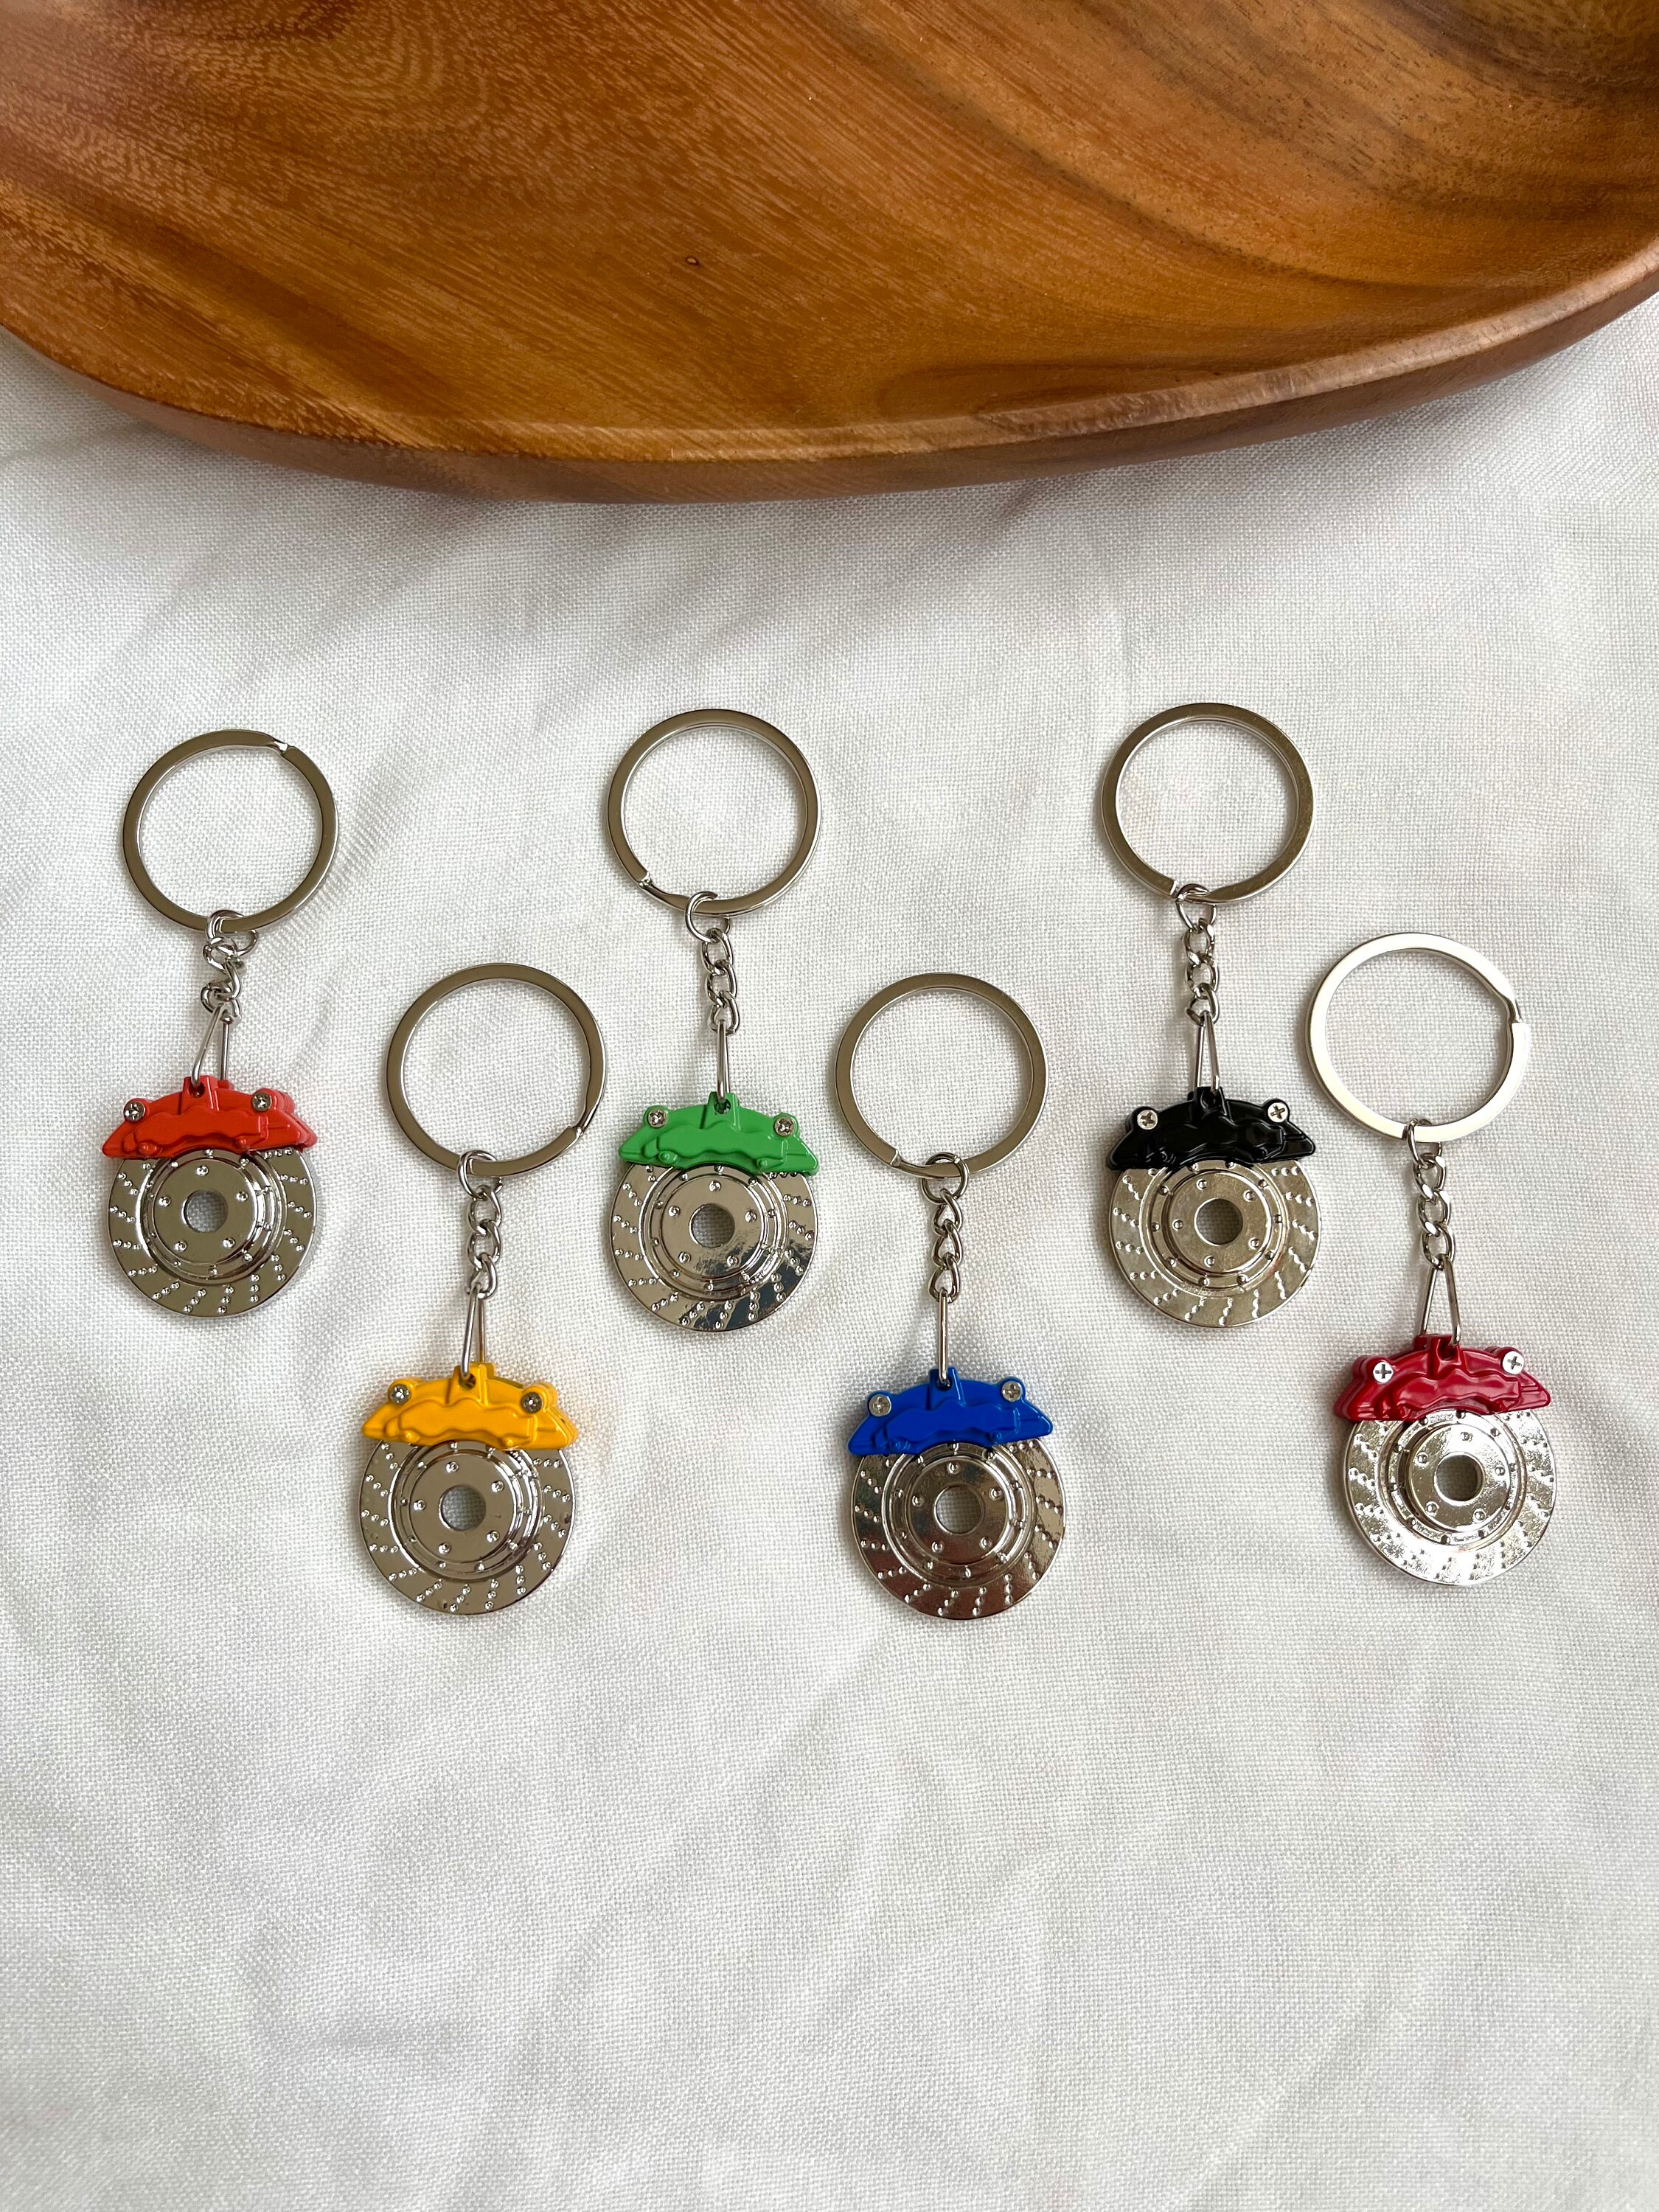 Auto Parts Metal Keychains, Turbo, Six Speed Manual Gearbox, Wheel Tire Rim,  Brake Rotor, Silver Wrench Keychains, Unique Gifts 